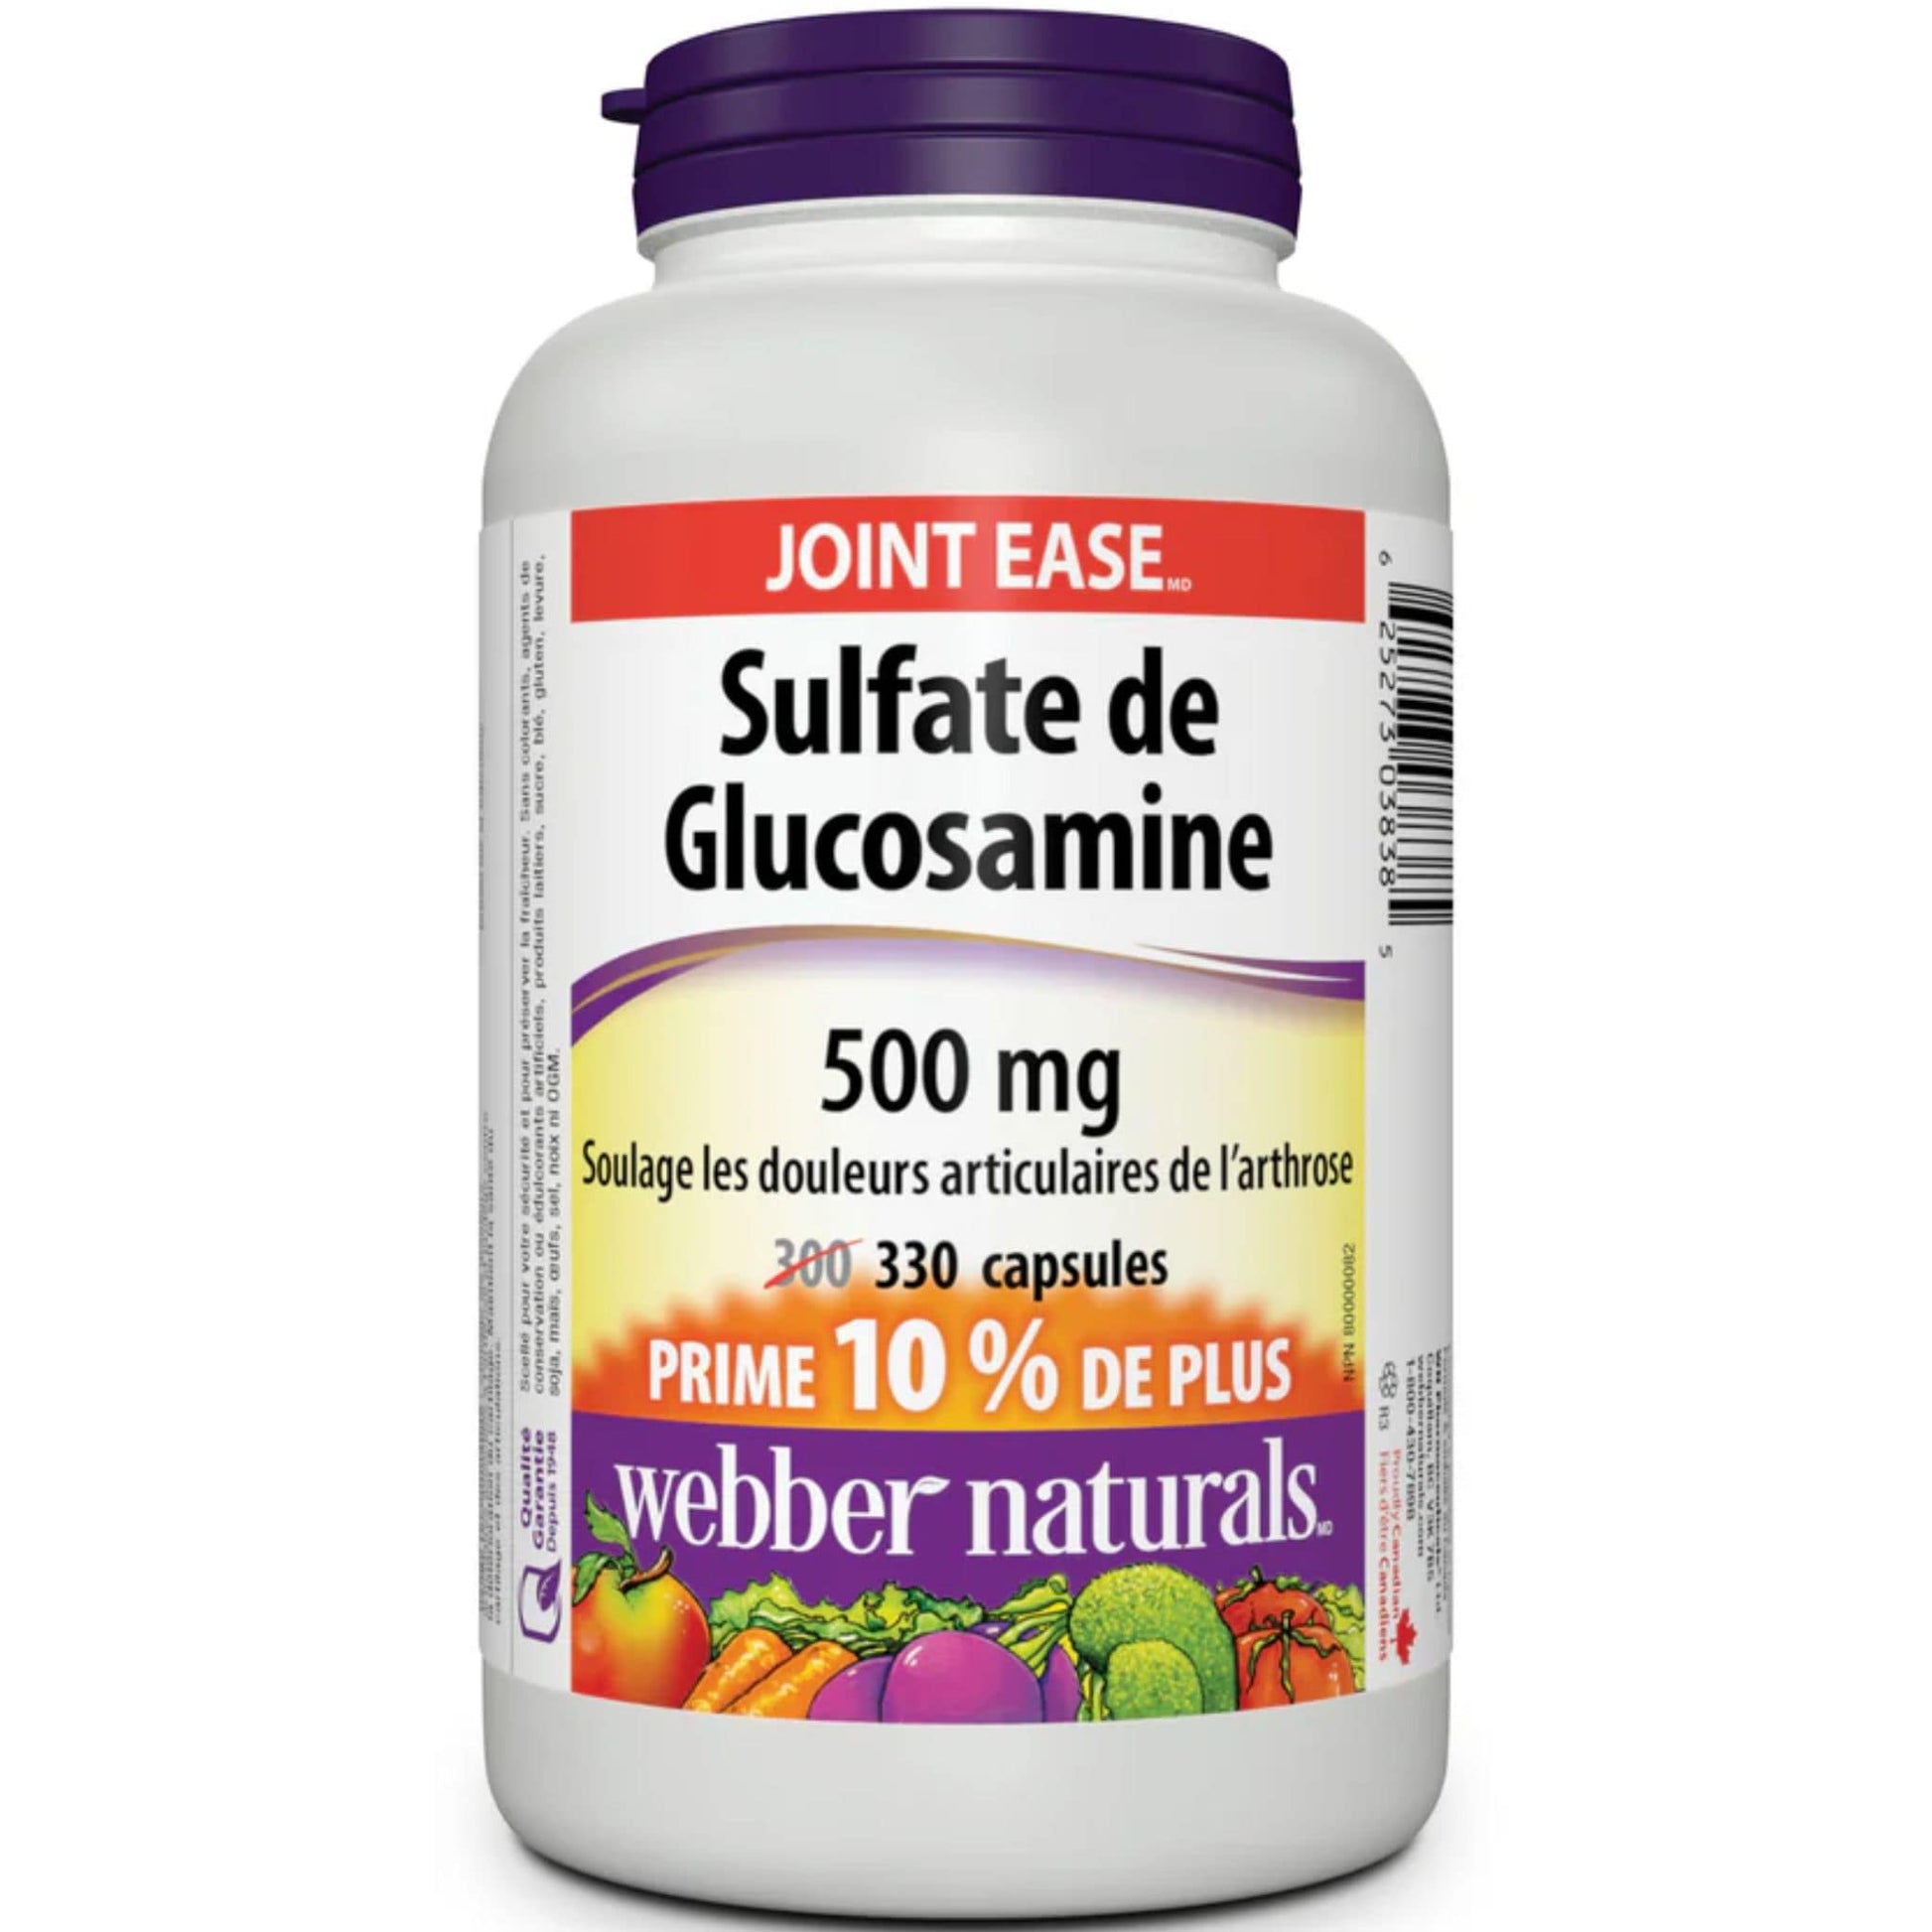 330 Capsules | Webber Naturals Glucosamine Sulfate 500mg // French Bottle